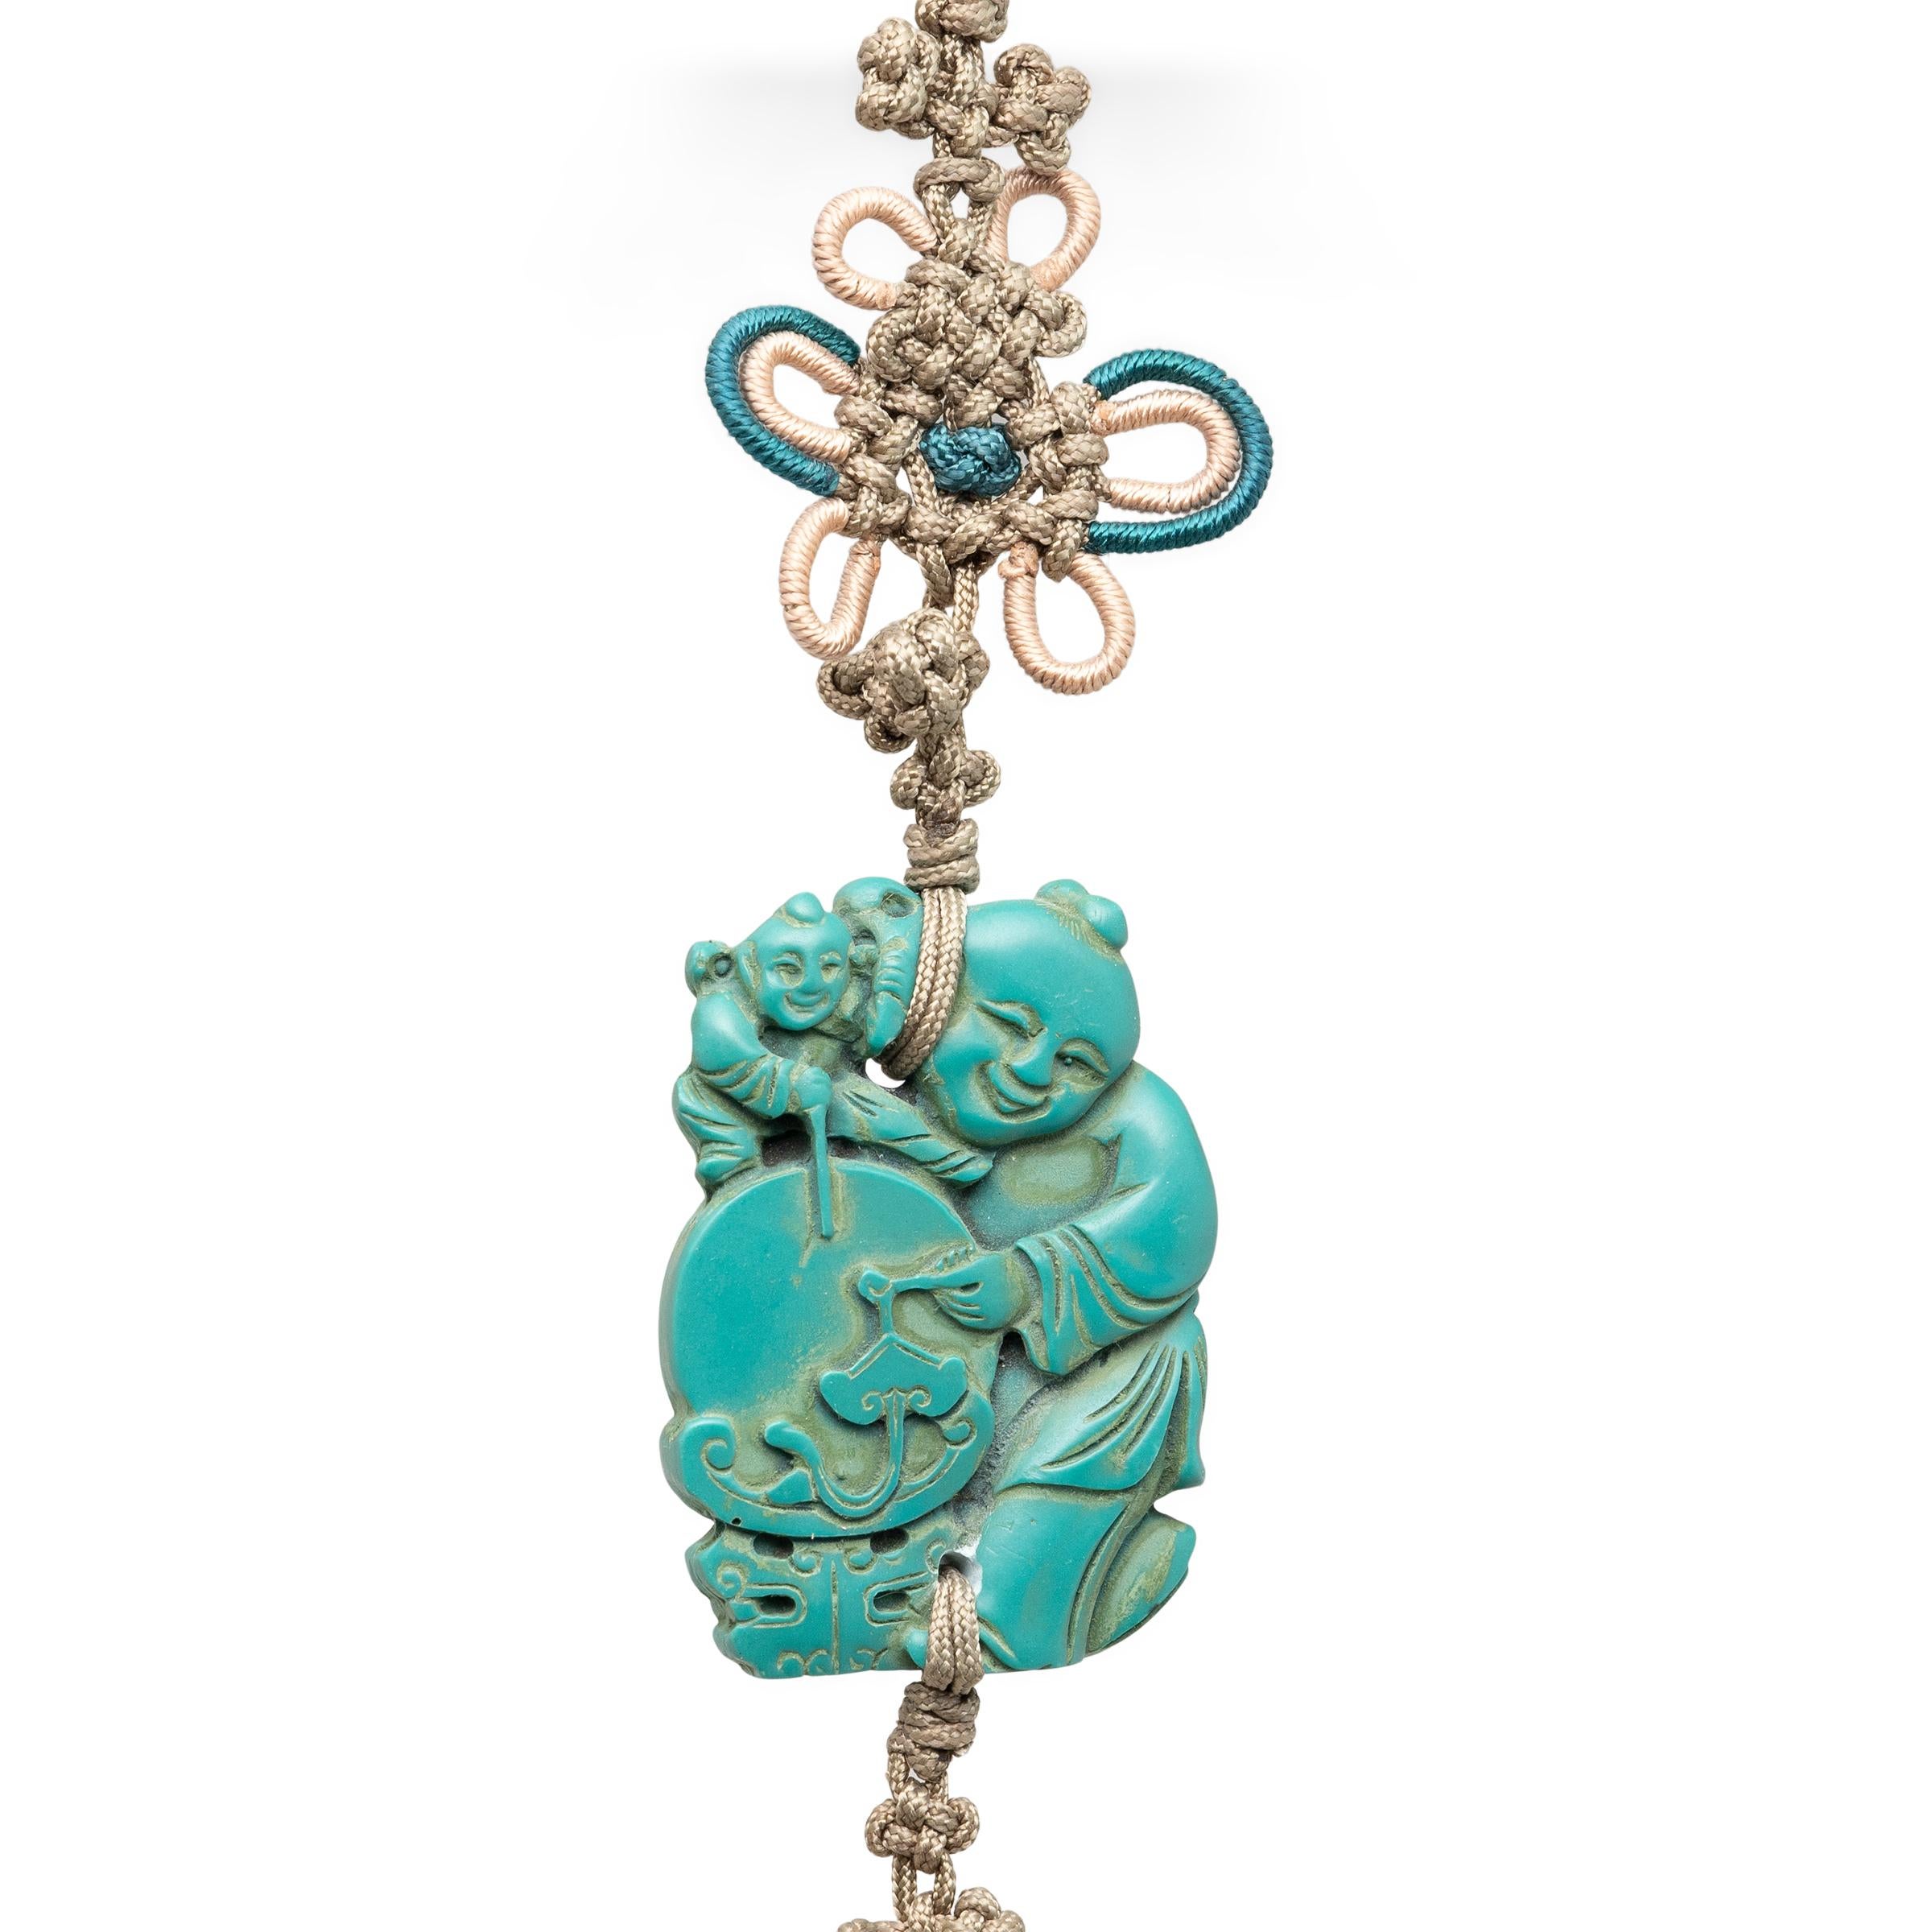 Chinese knotted tassels are used to add elegance to everyday items like hairpins or lanterns. They often hold sentimental value, and are passed down through families for generations. In ancient times lovers sometimes gave knots as tokens of their